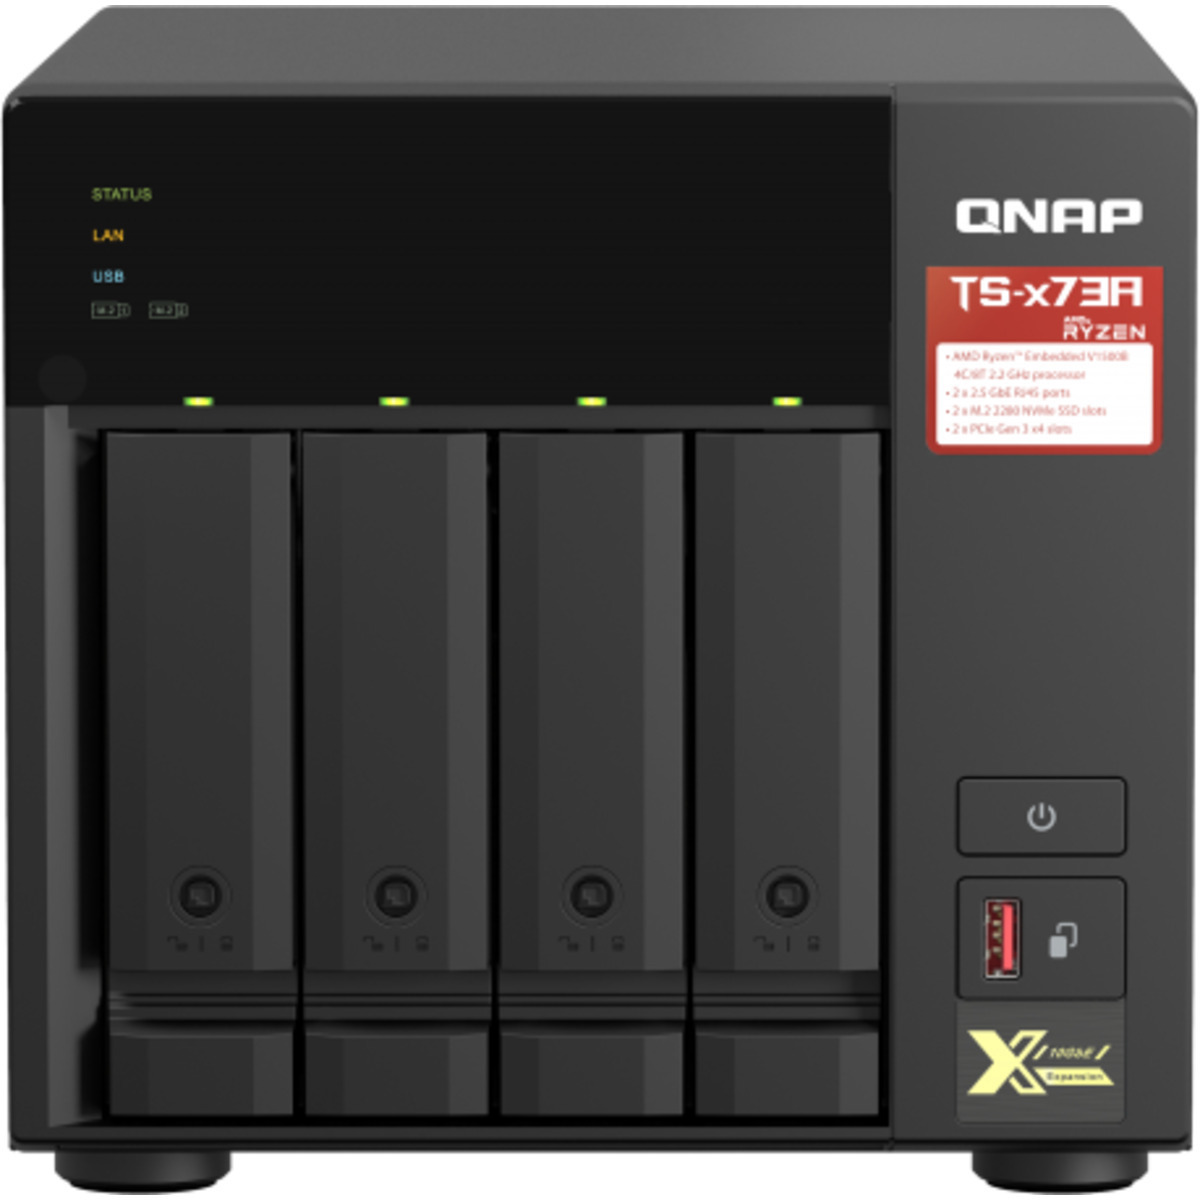 QNAP TS-473A 64tb 4-Bay Desktop Multimedia / Power User / Business NAS - Network Attached Storage Device 4x16tb Seagate IronWolf Pro ST16000NT001 3.5 7200rpm SATA 6Gb/s HDD NAS Class Drives Installed - Burn-In Tested - ON SALE TS-473A